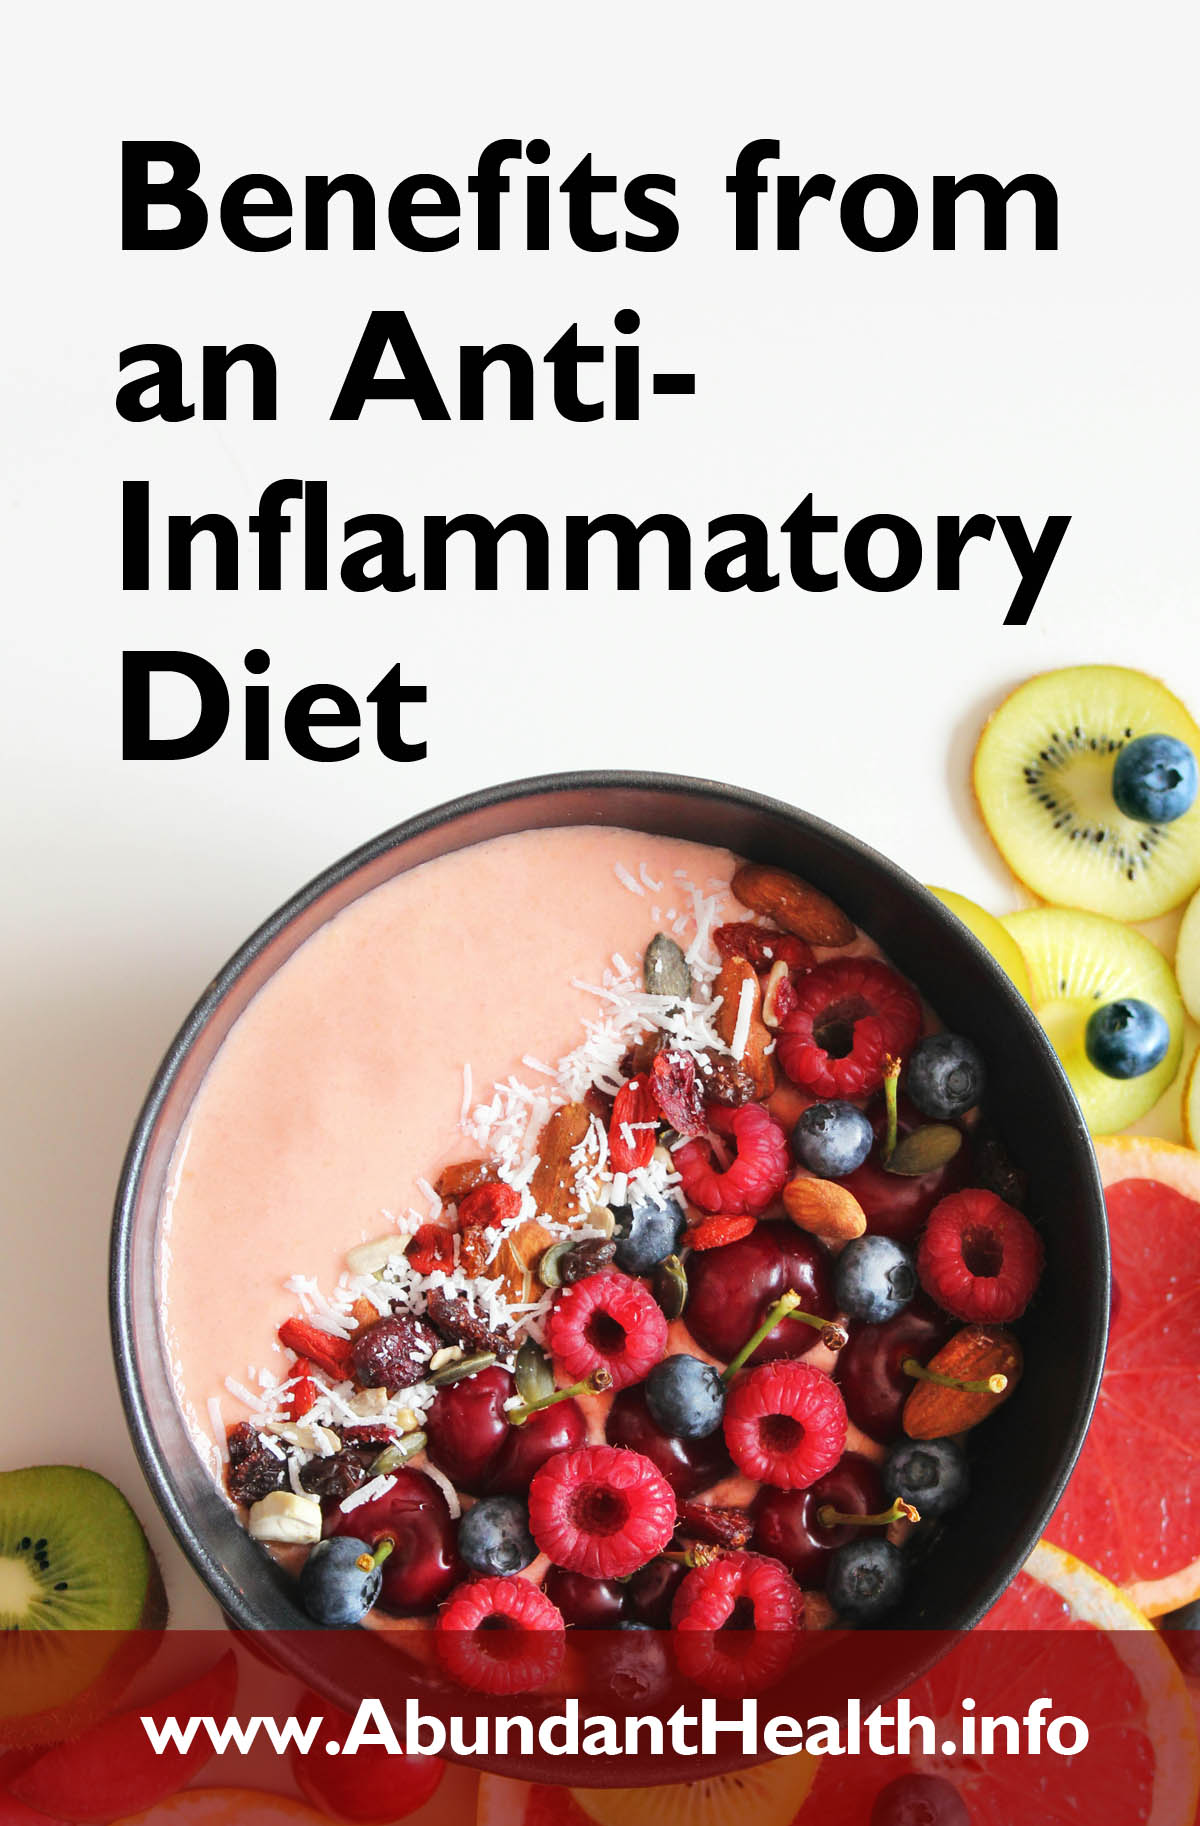 Benefits from an Anti-Inflammatory Diet